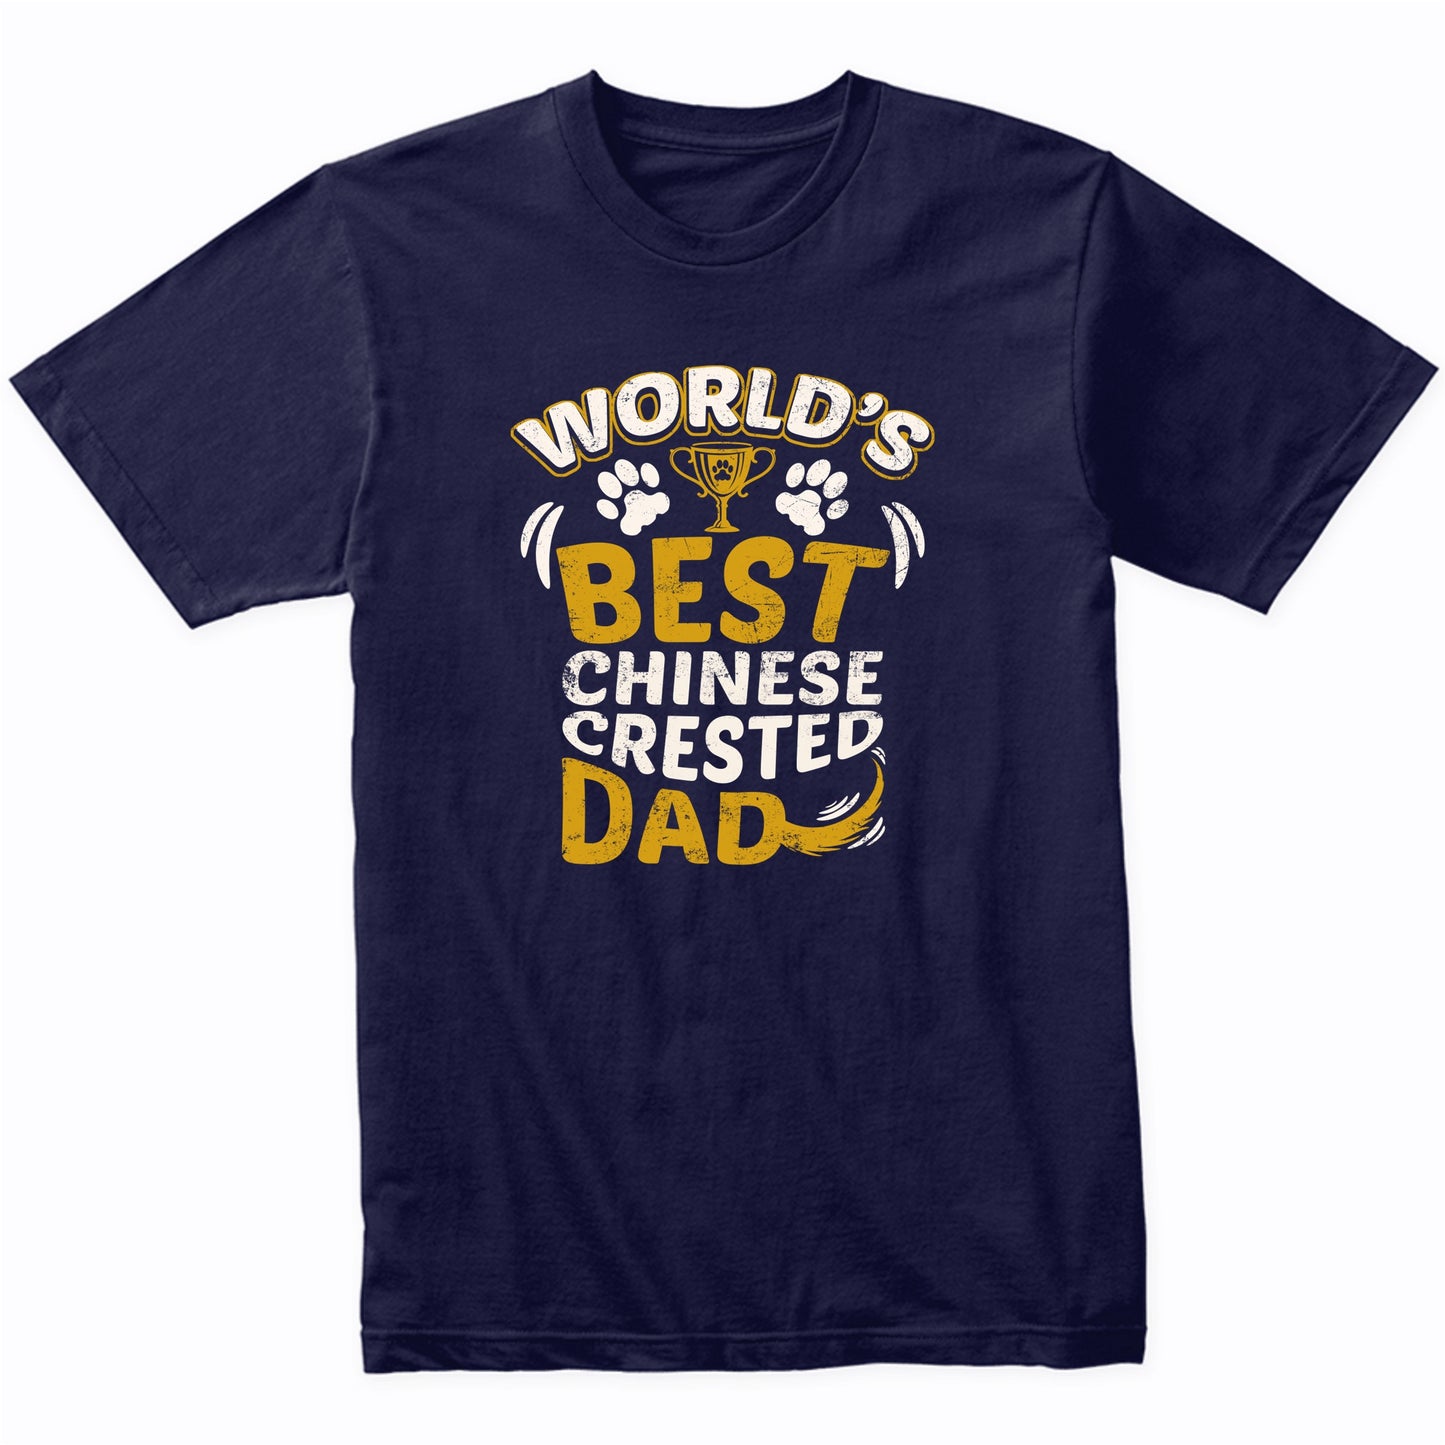 World's Best Chinese Crested Dad Graphic T-Shirt